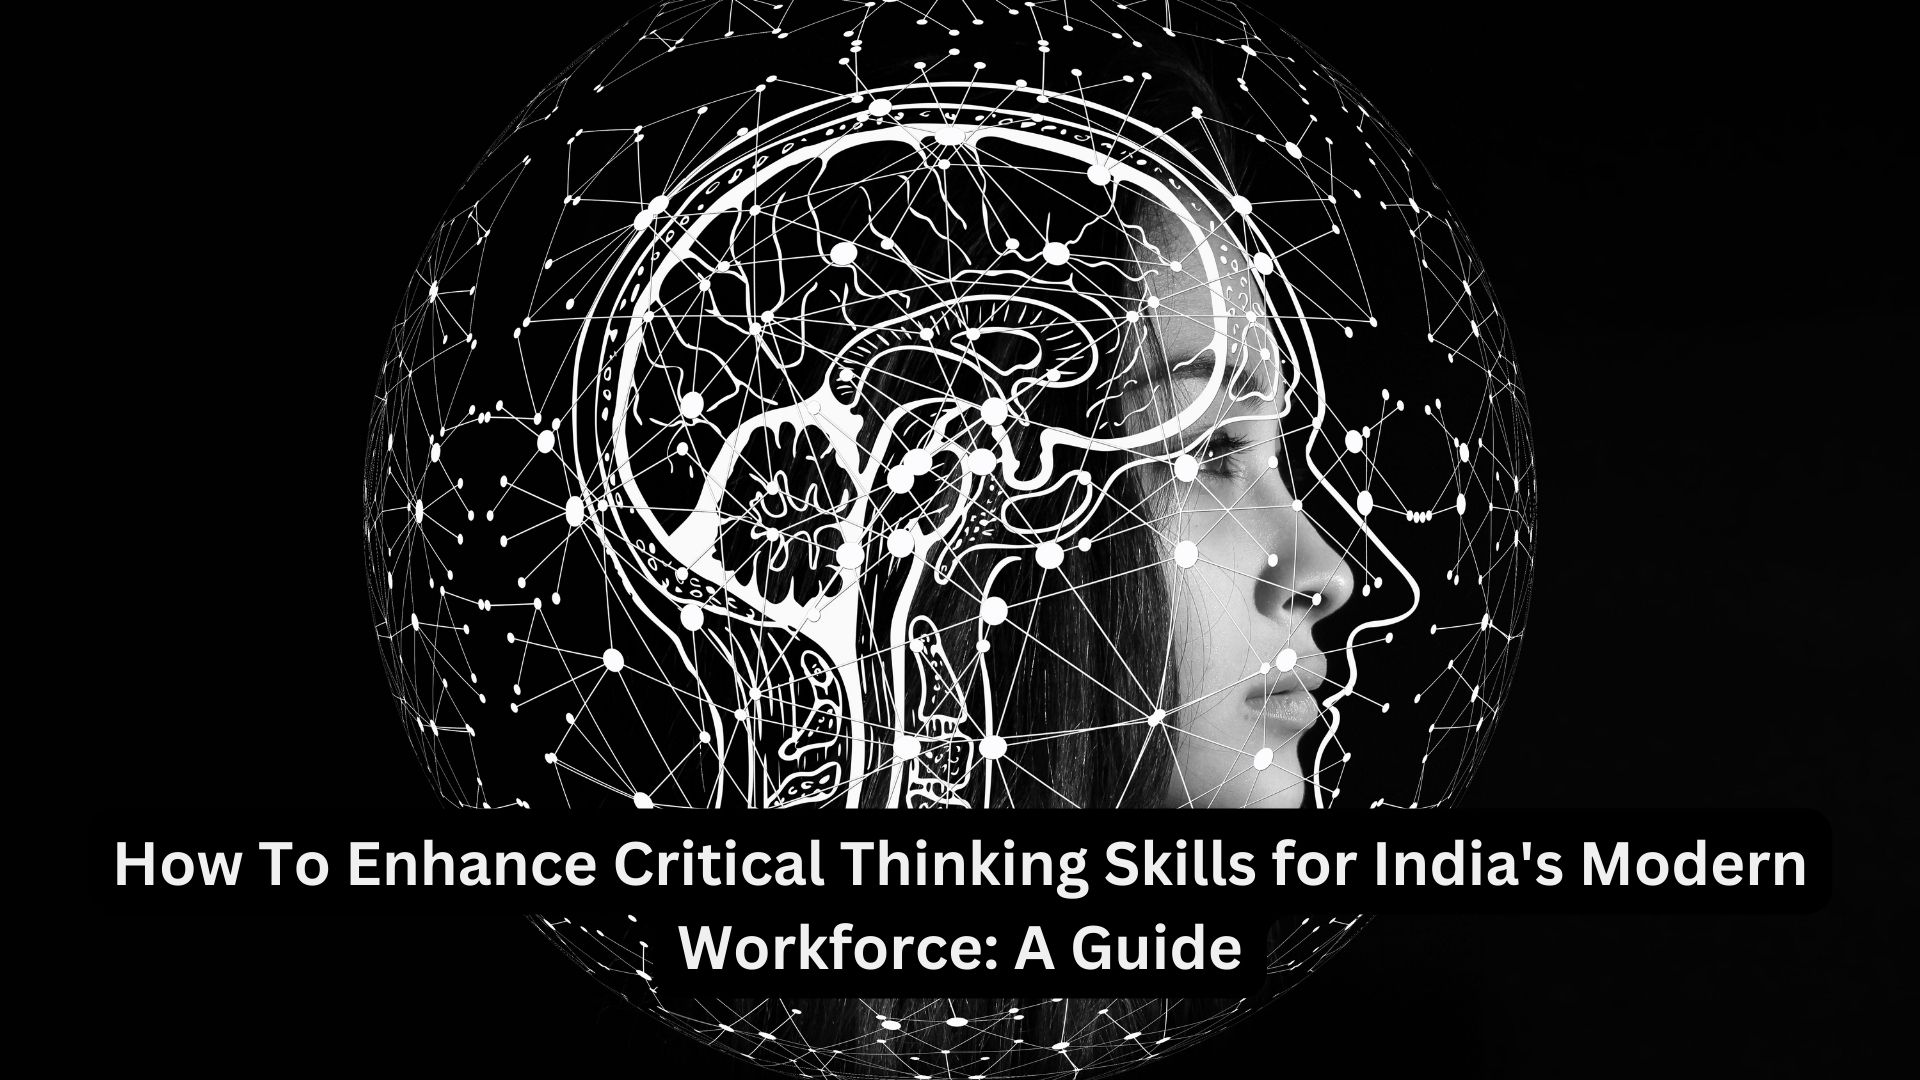 How To Enhance Critical Thinking Skills for India's Modern Workforce: A Guide